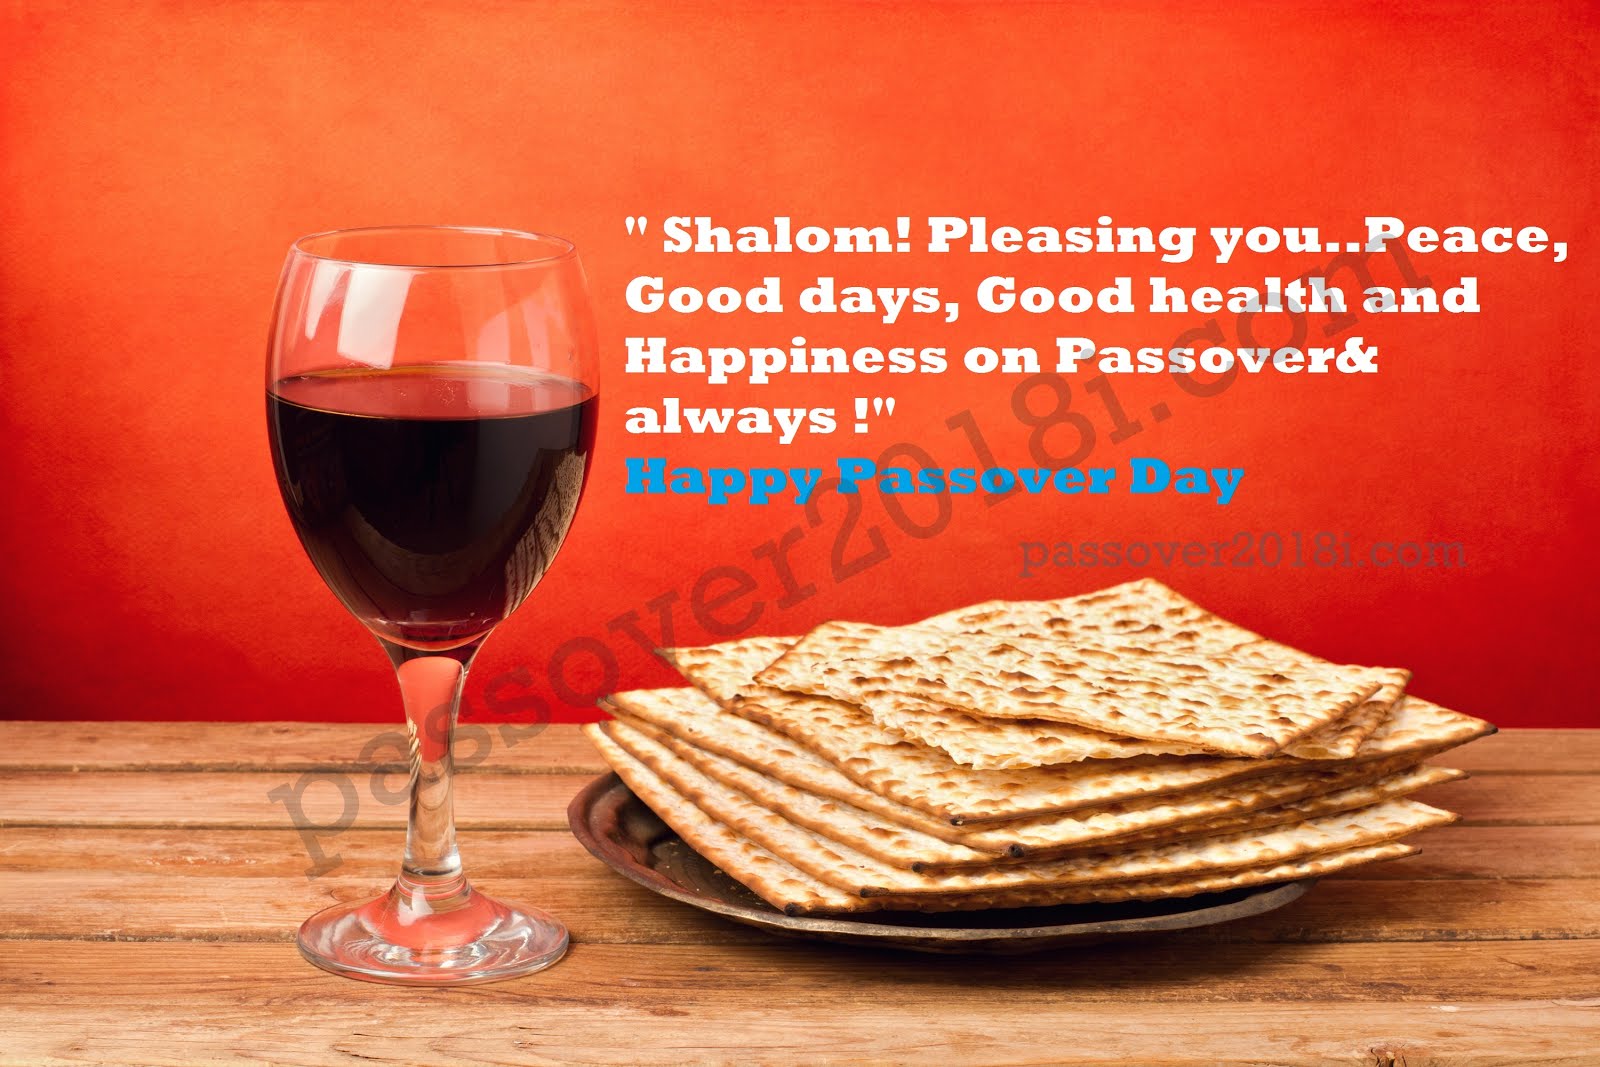 Last Day Of Passover Wallpapers